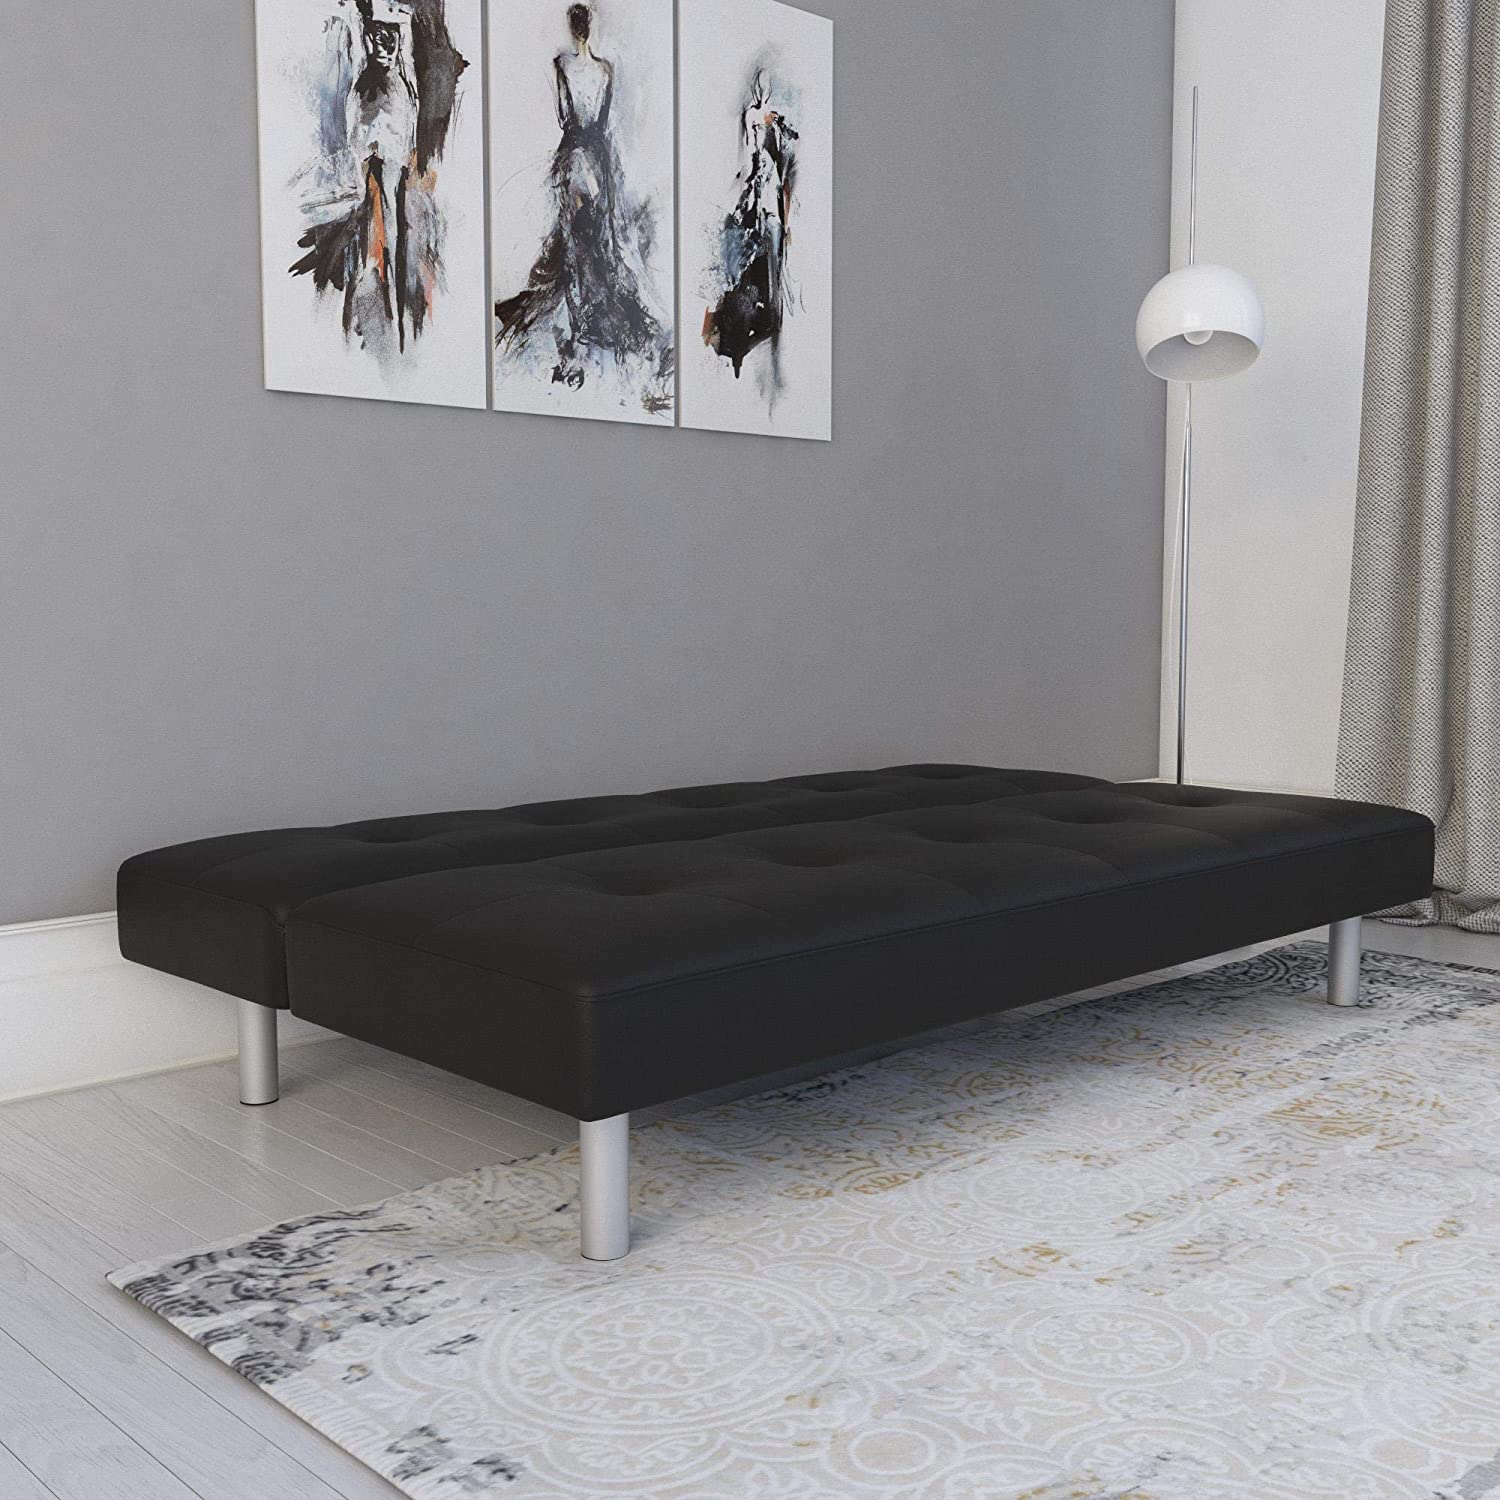 SOFA CUM BED Leatherette Upholstery, Modern Style, Black Faux Leatherette